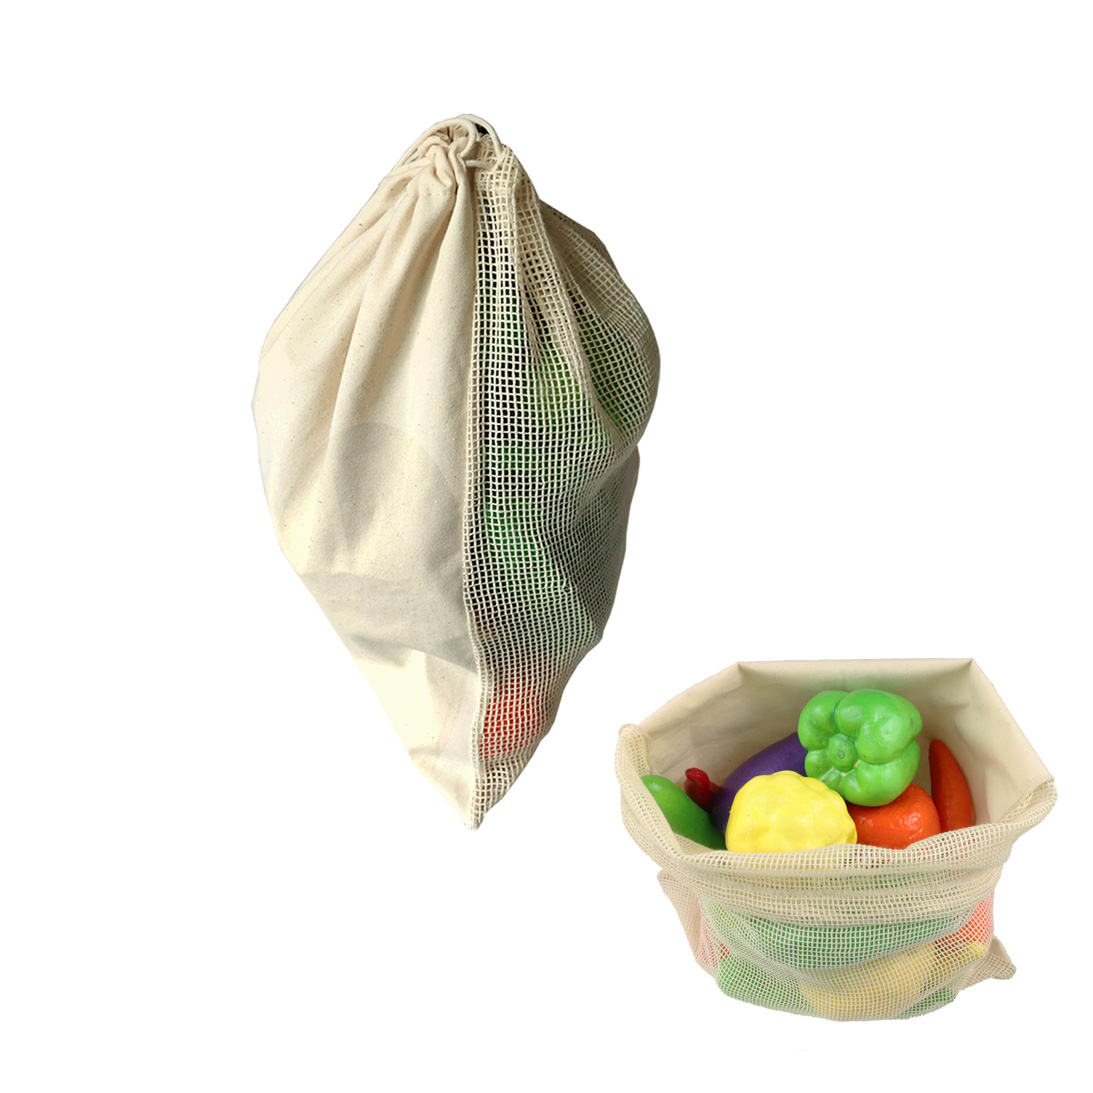 GL-AAJ1198 7.8in x 11.8in Reusable Cotton Mesh Produce Bags